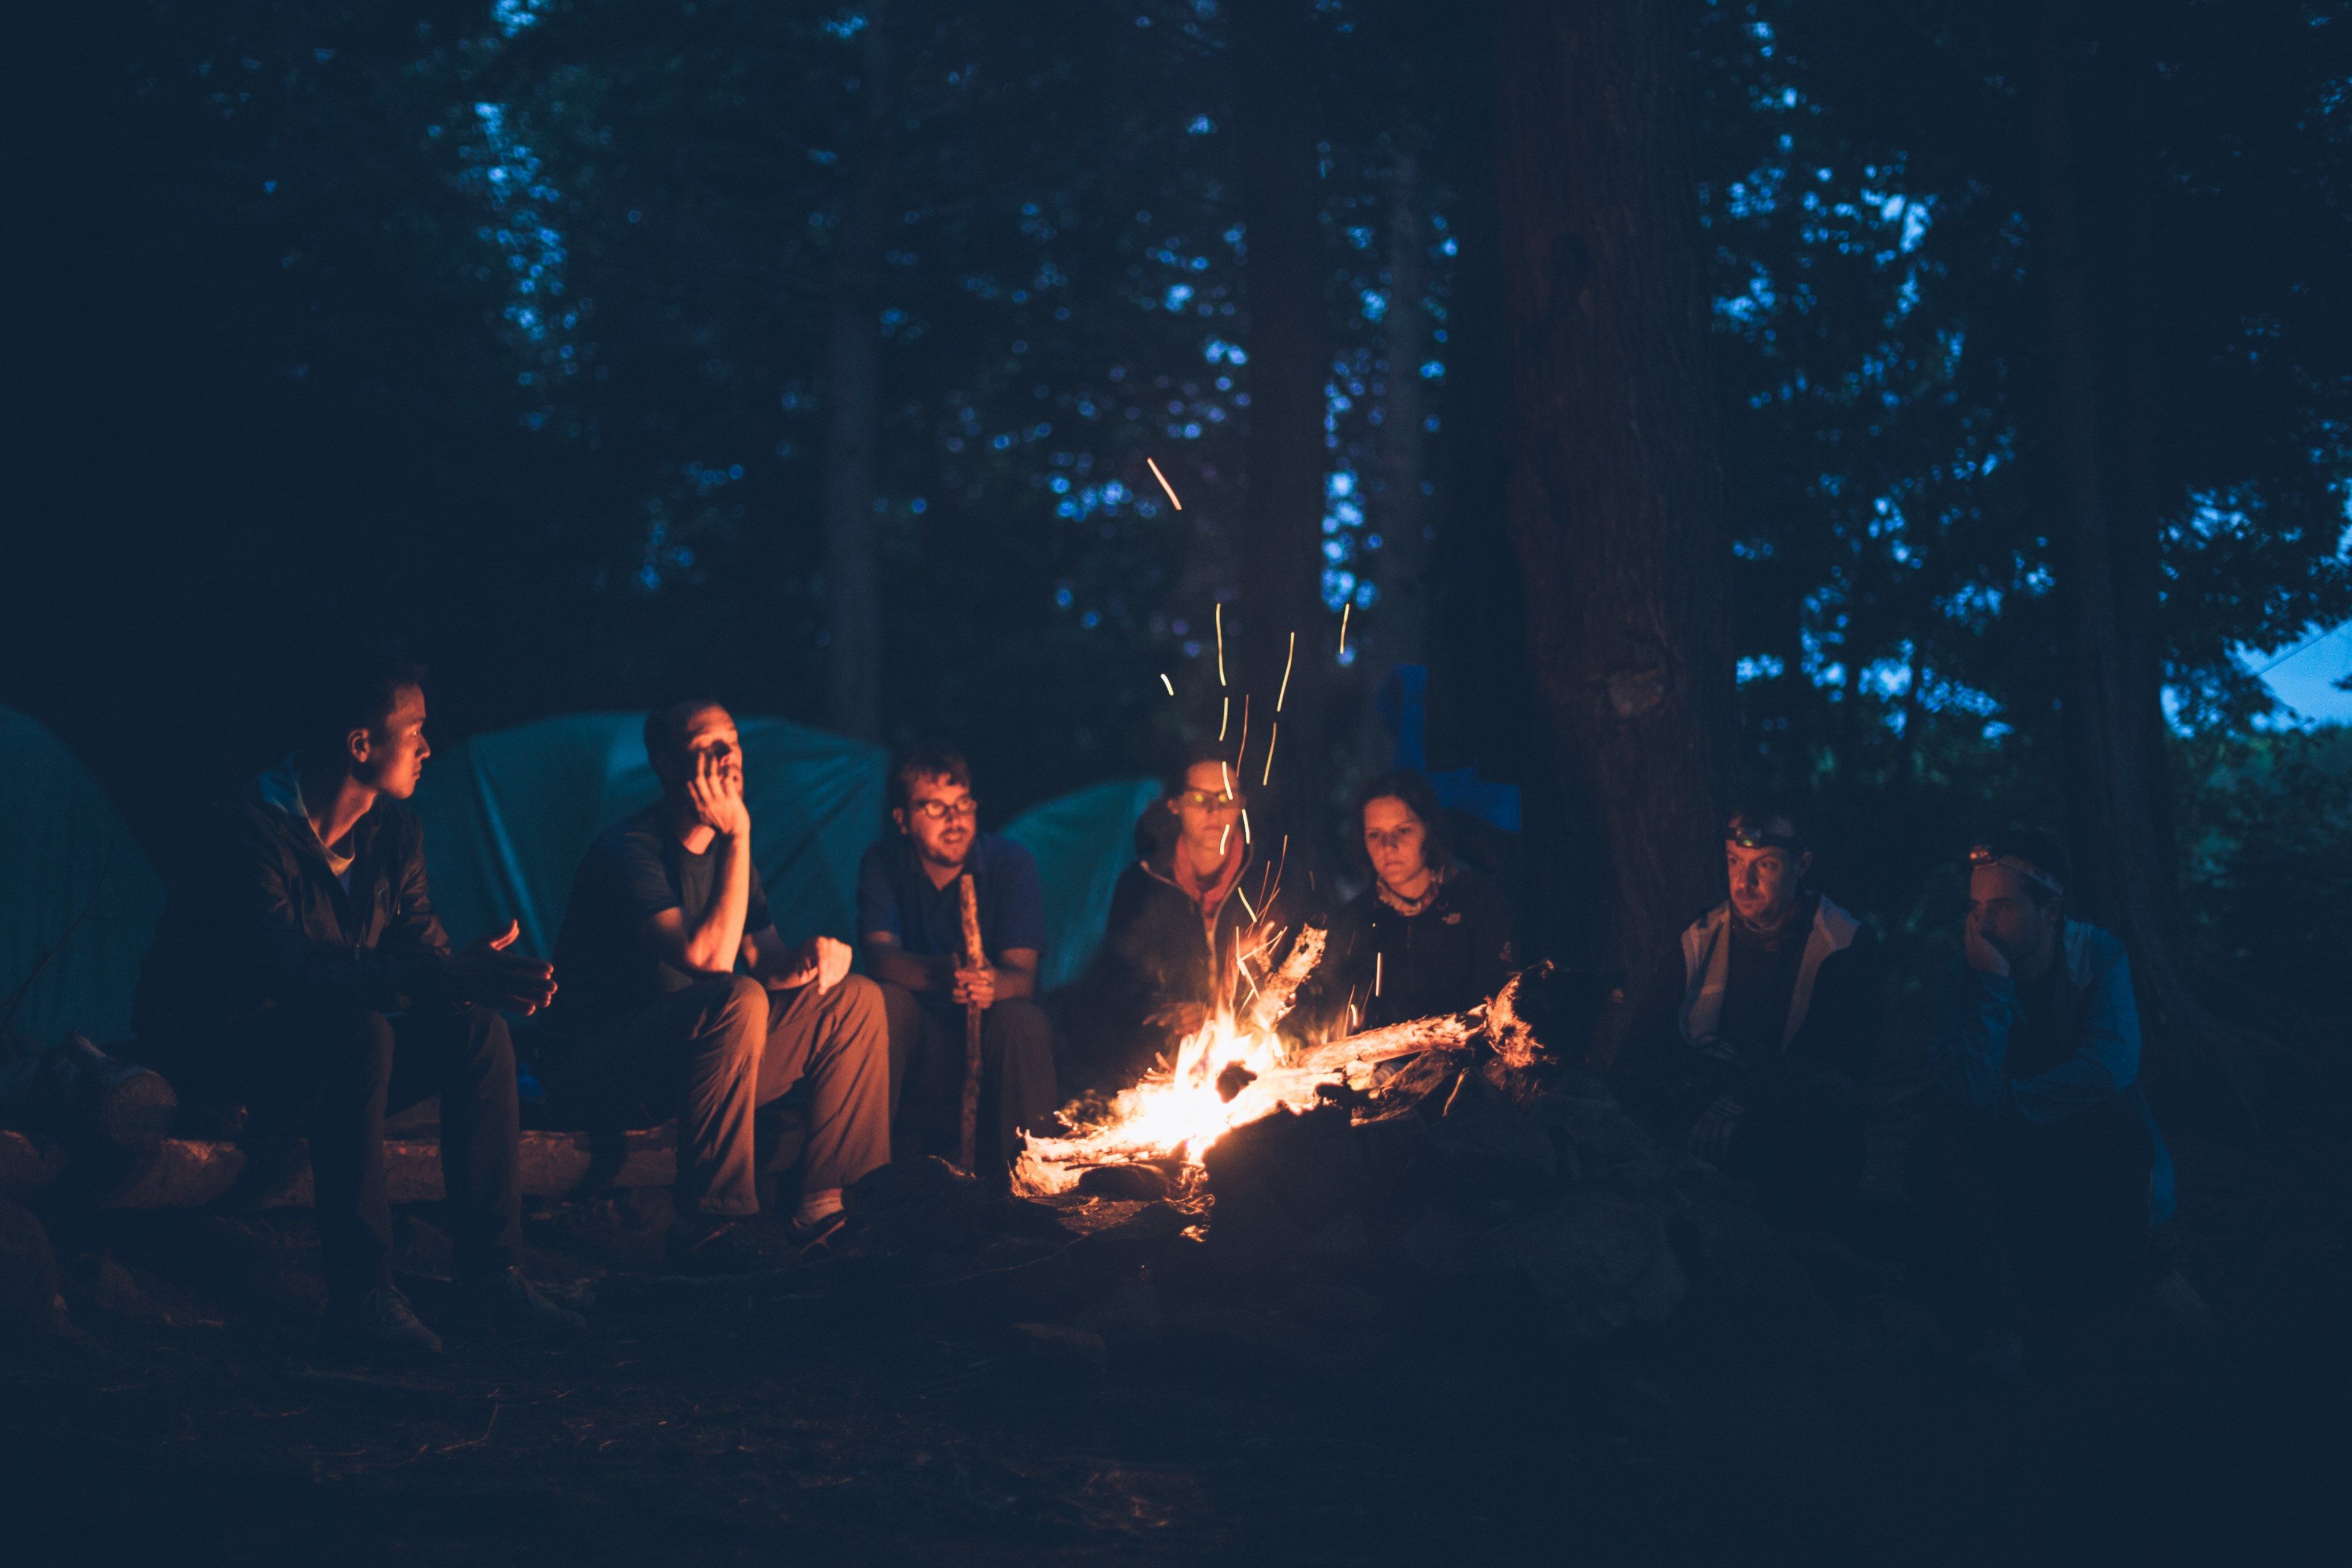 Wallpaper / fire camping campfire and group HD 4k wallpaper free download